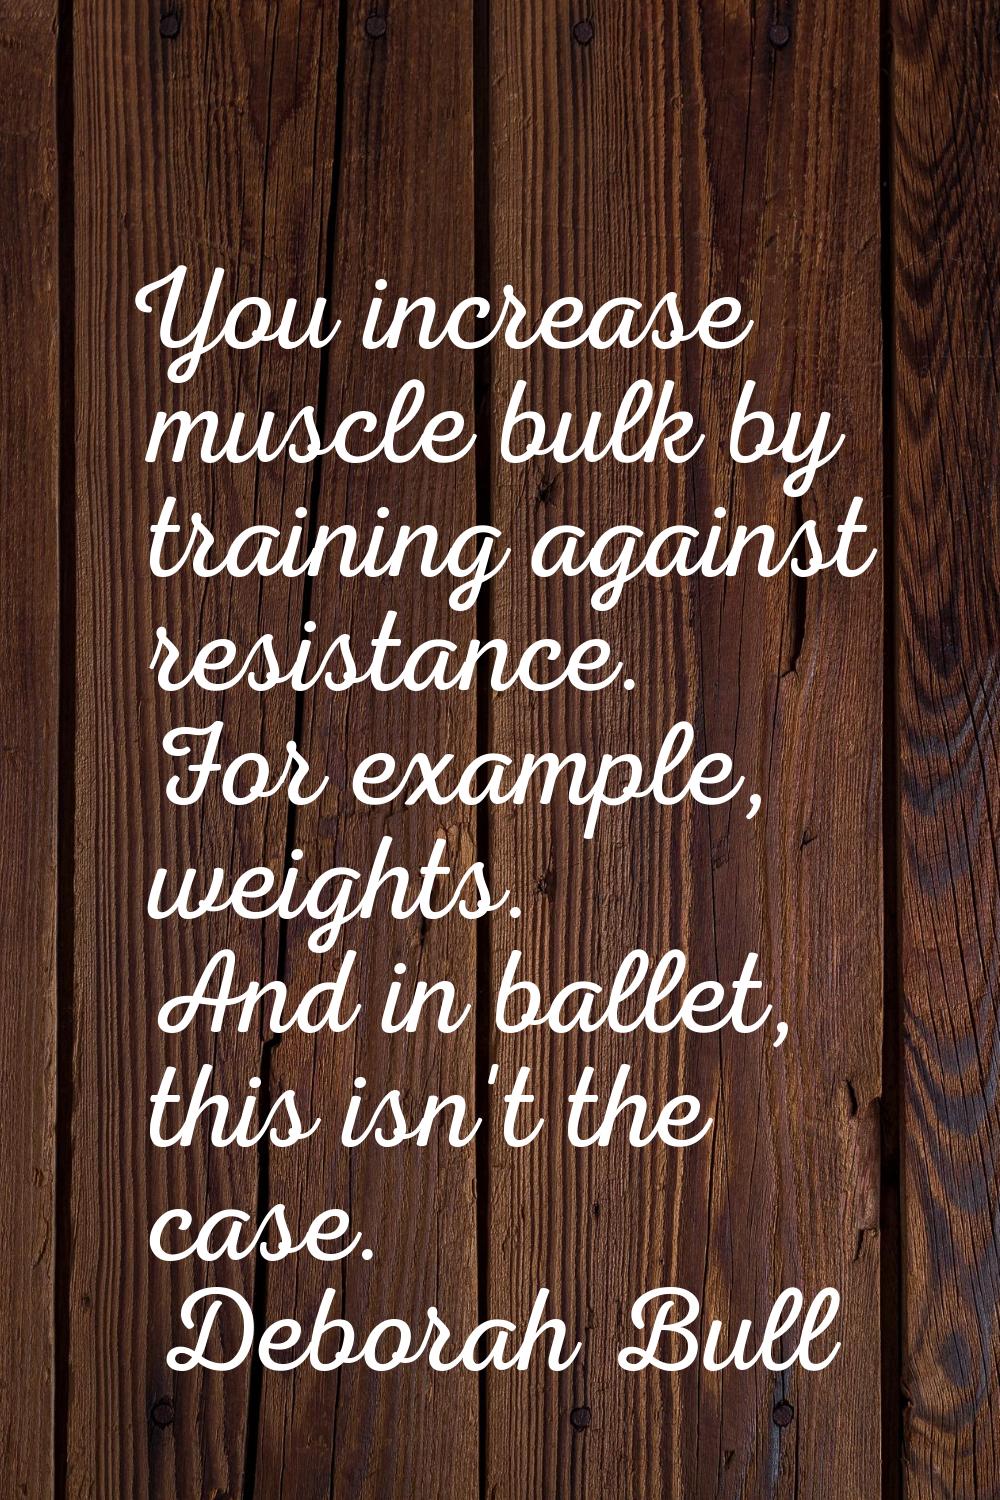 You increase muscle bulk by training against resistance. For example, weights. And in ballet, this 